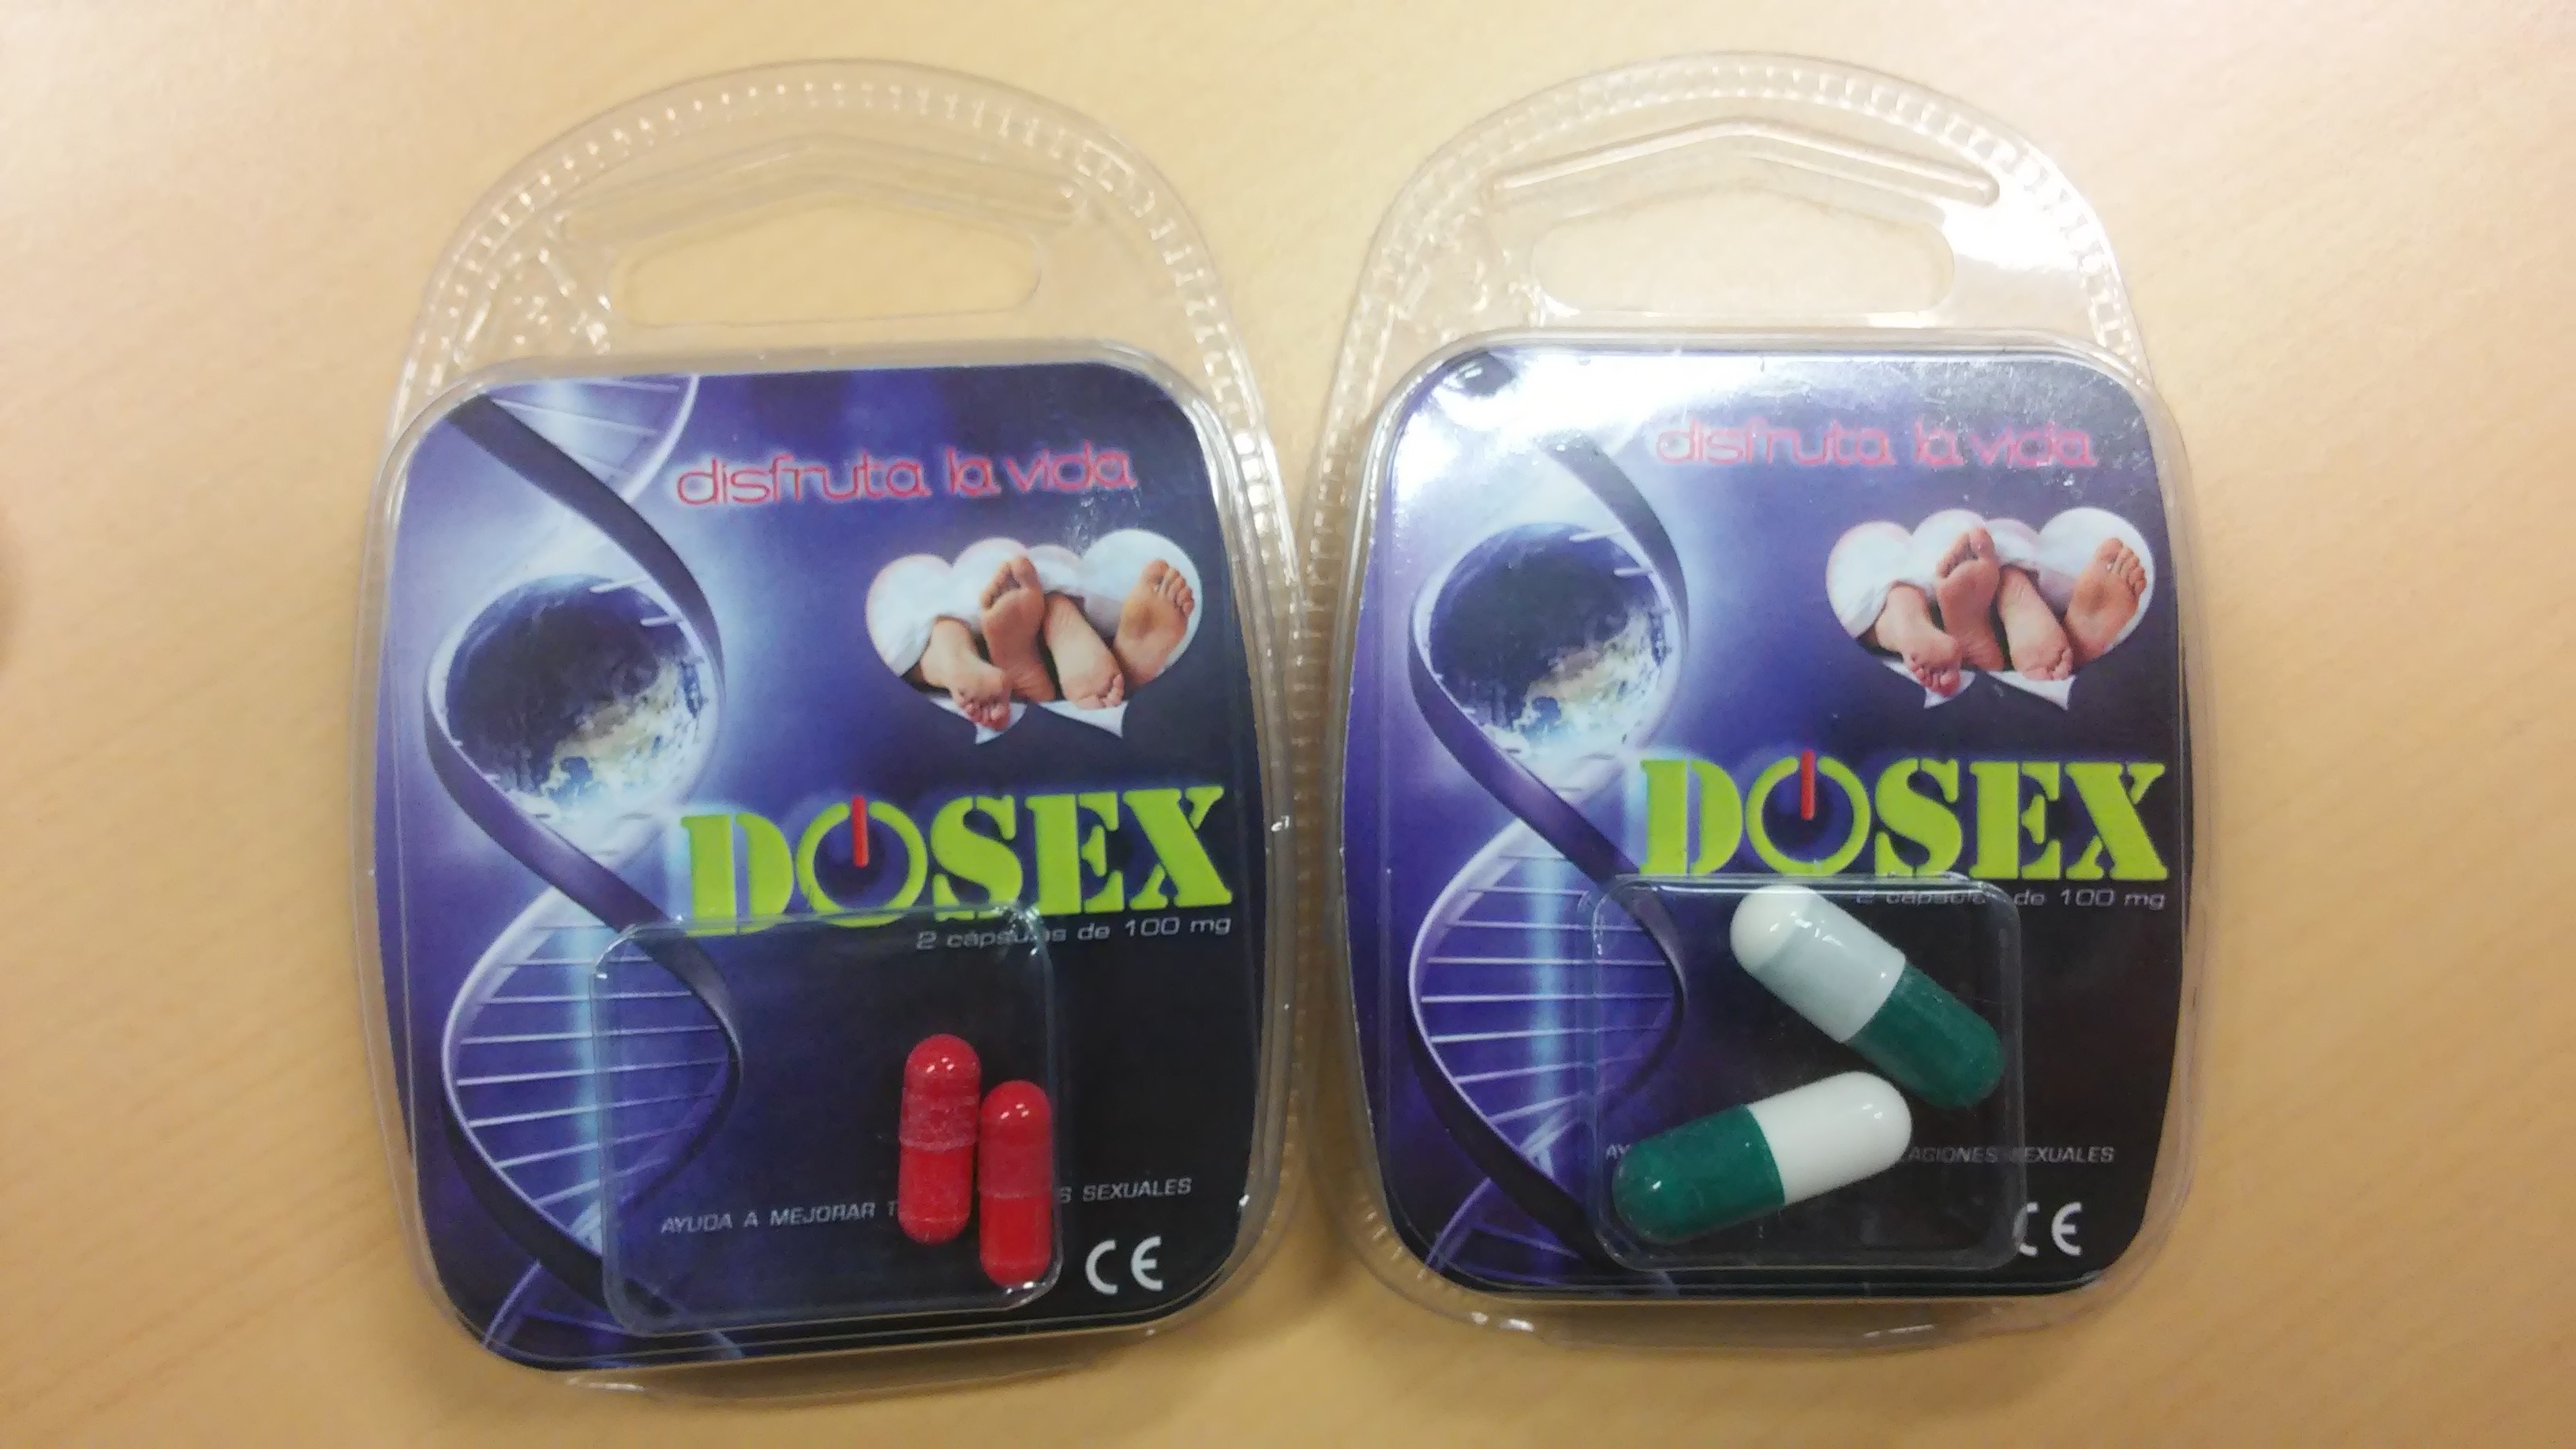 Image of the illigal product: Dosex